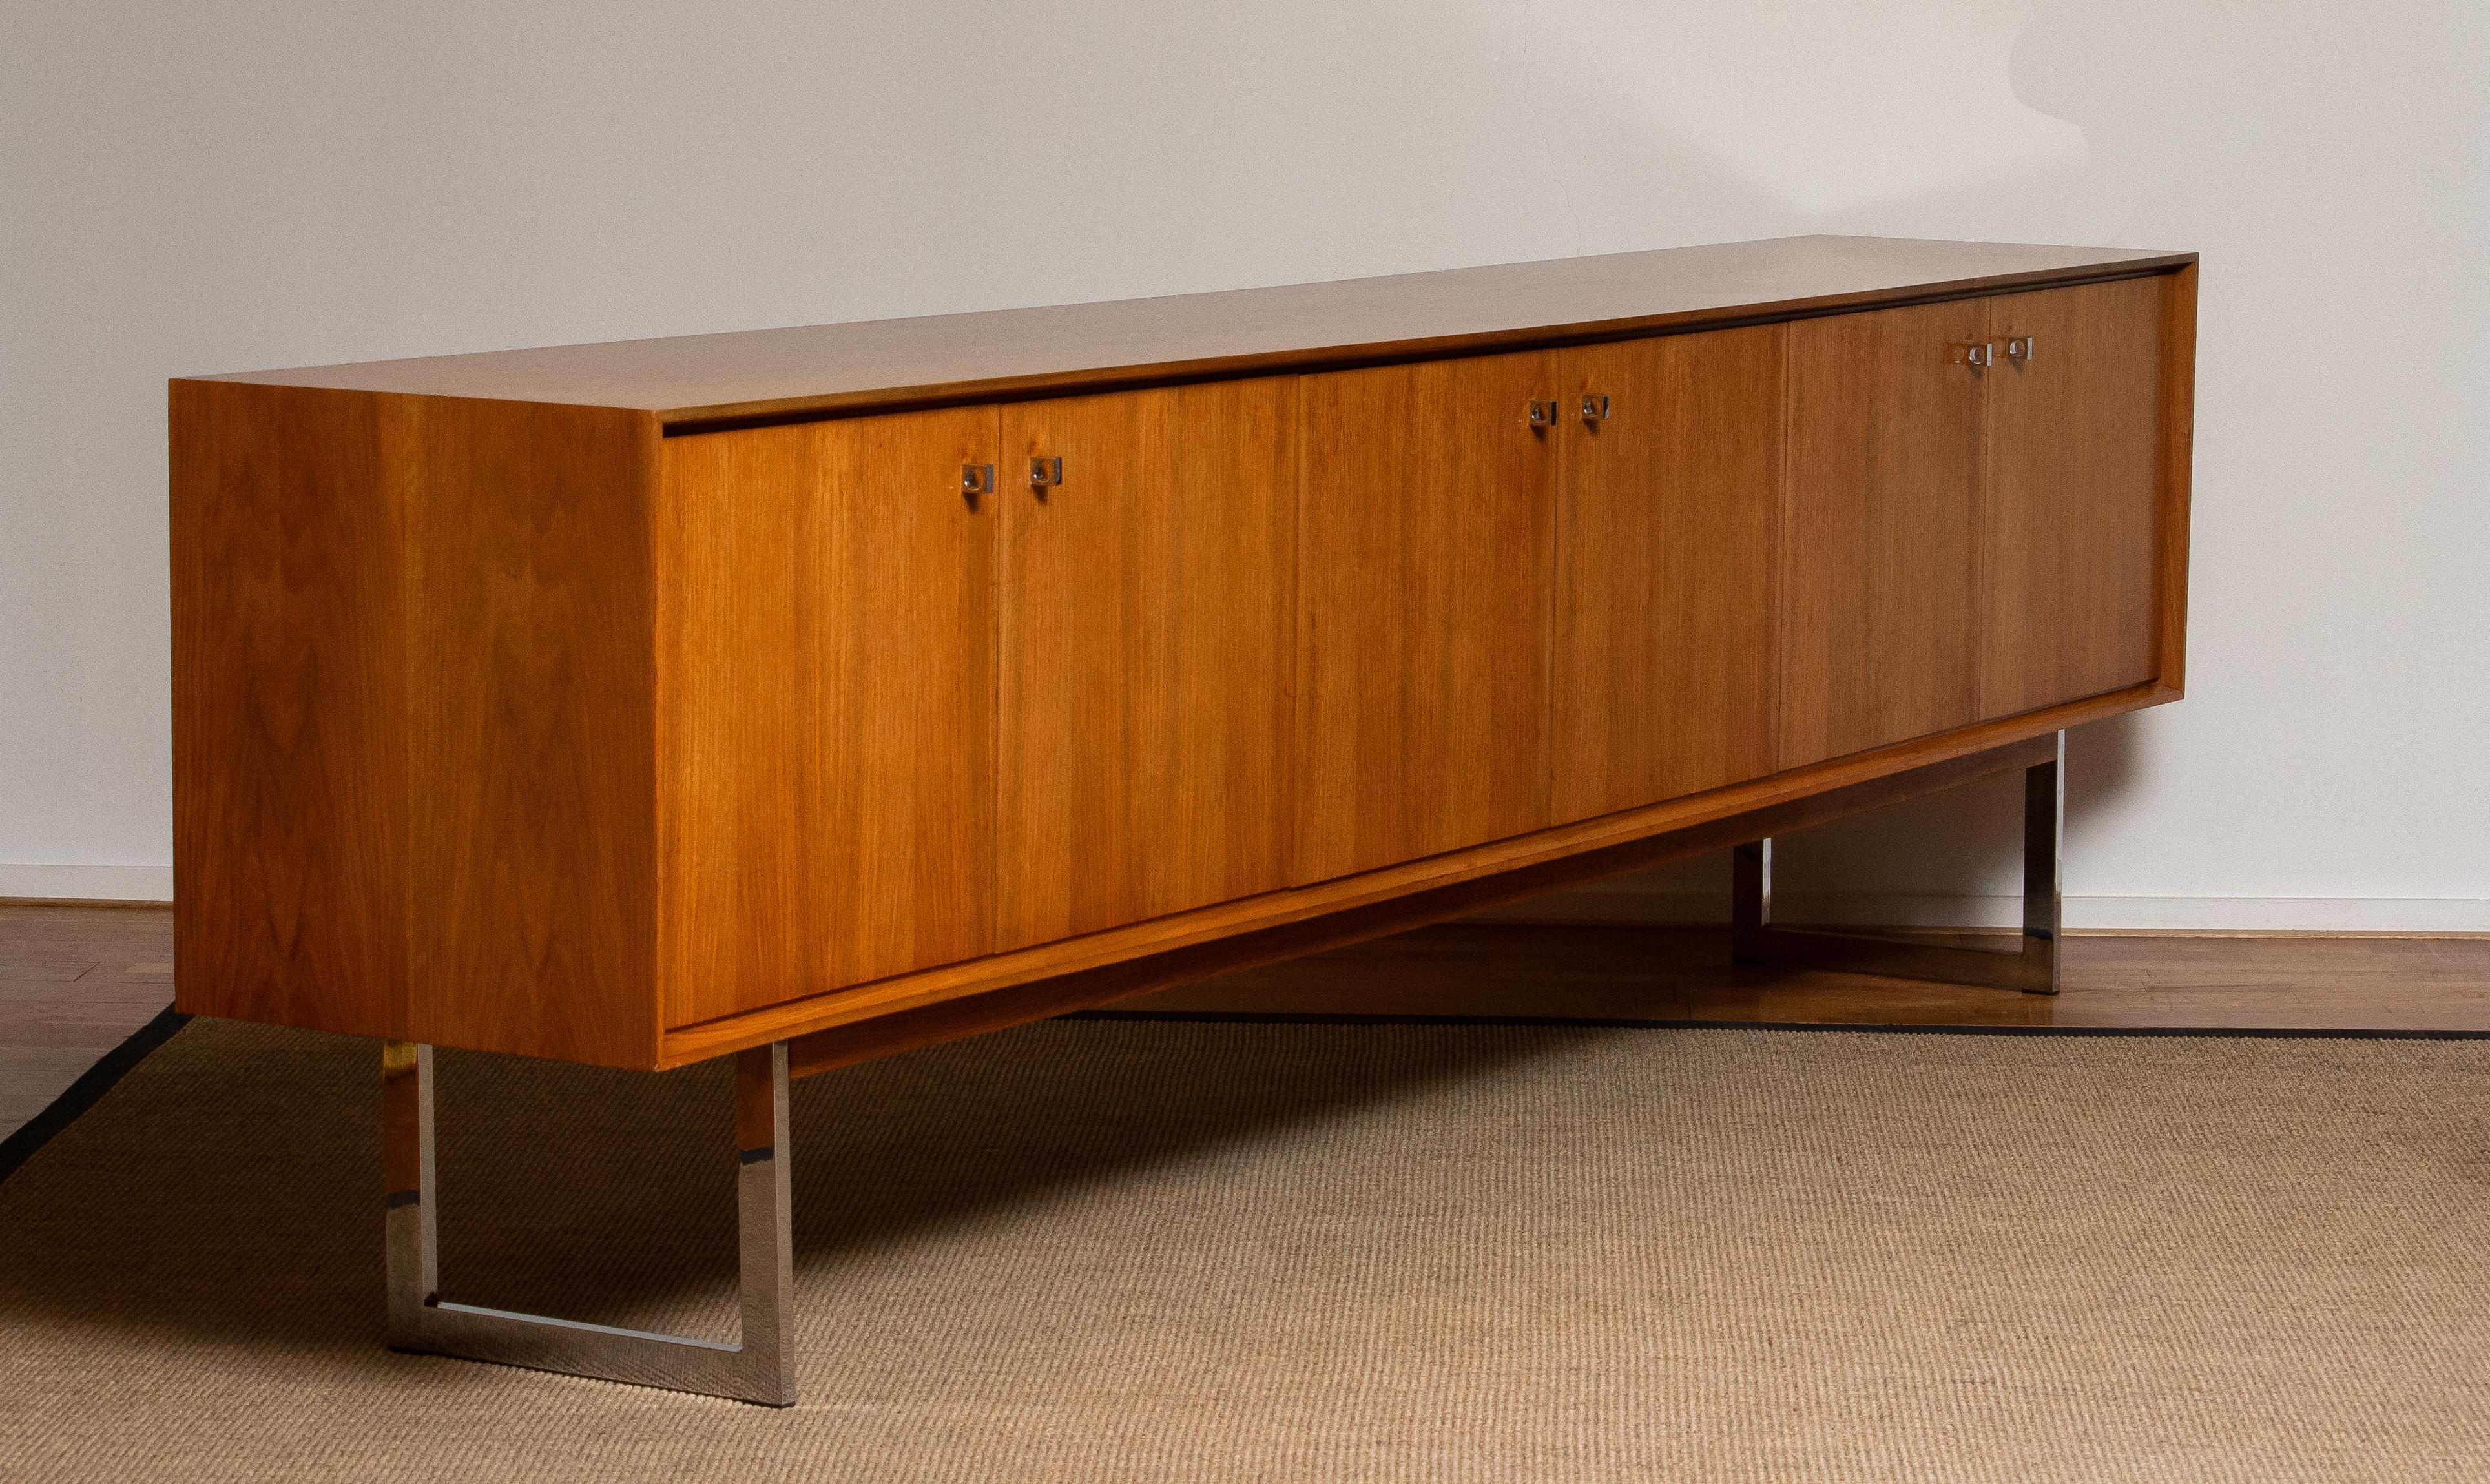 1970, Wide Credenzas Sideboard in Walnut with Chrome Handles and Legs 1